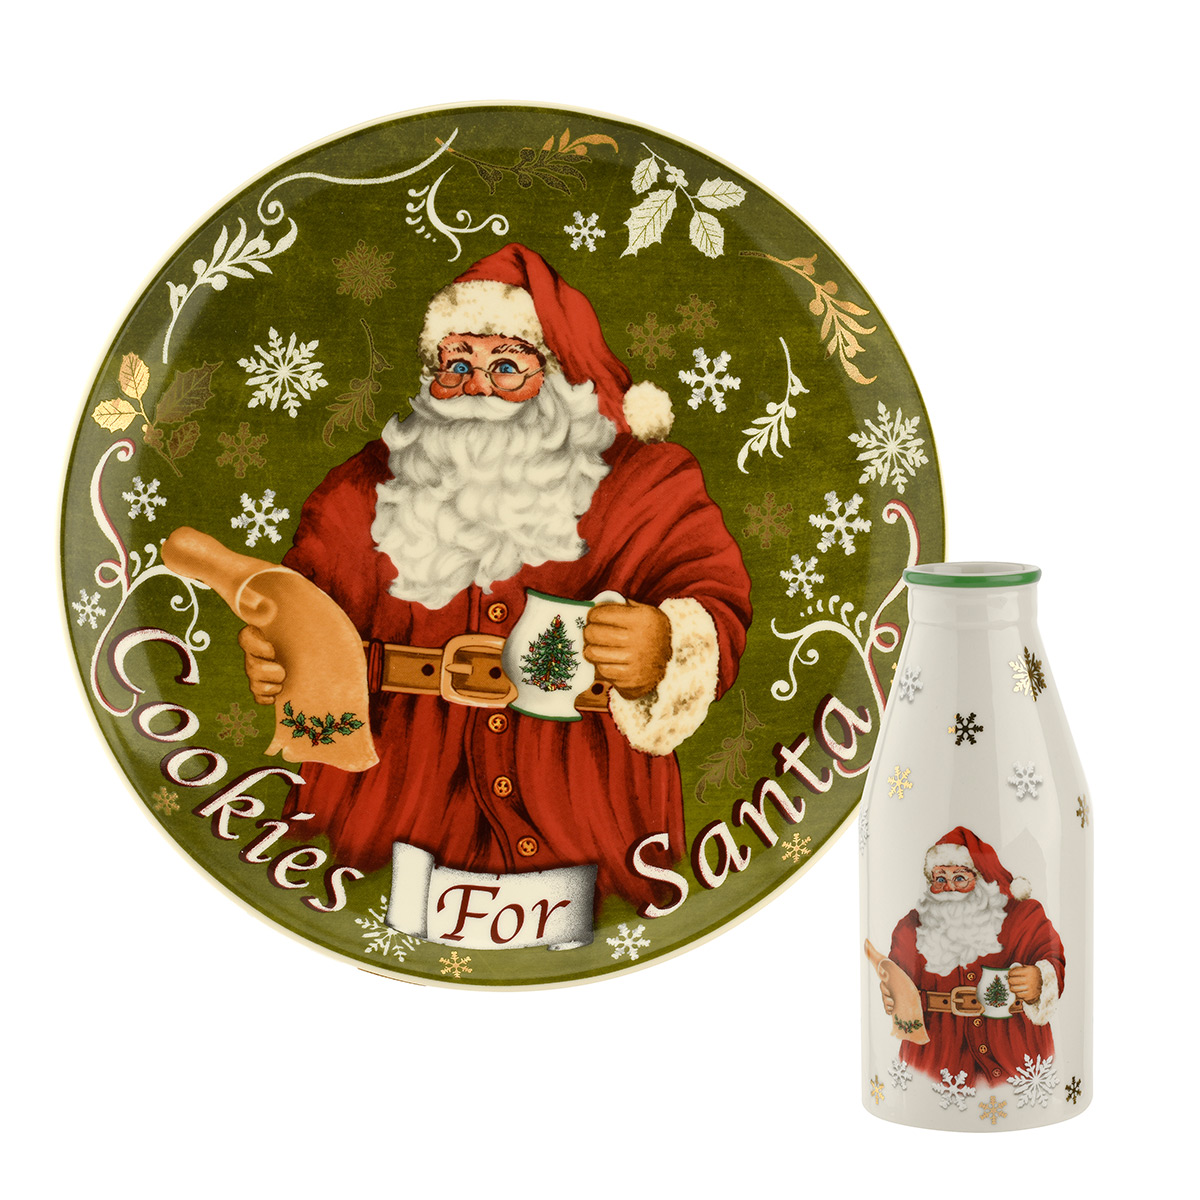 Spode Christmas Tree Serveware 2 Piece Cookies For Santa Plate And Bottle